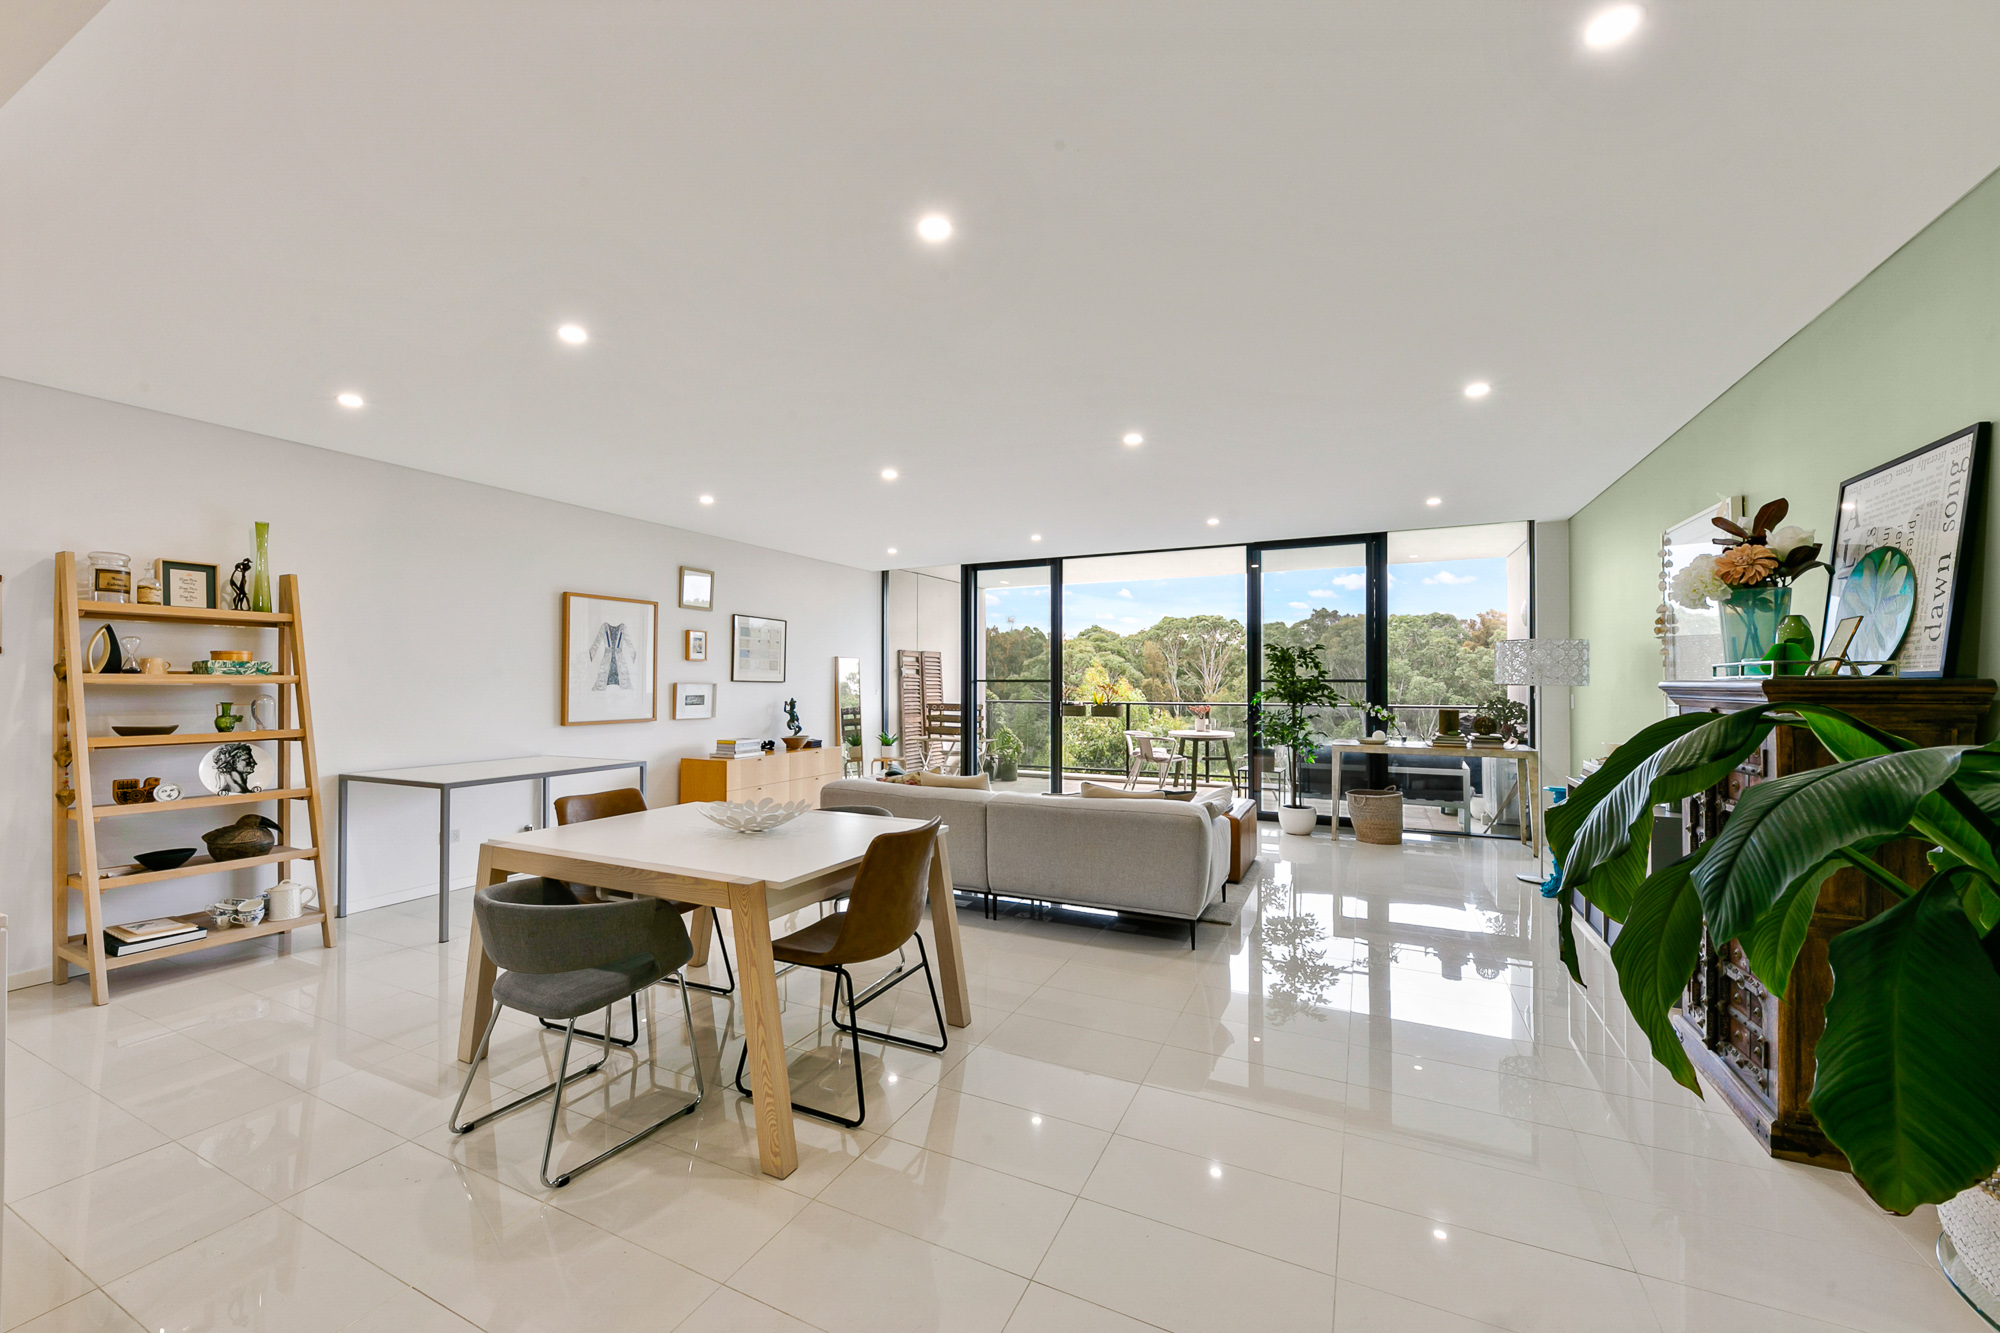 3 Bedrooms, Apartment, For Sale, Caddies Boulevard, 2 Bathrooms, Listing ID 1536, Rouse Hill, NSW, Australia,